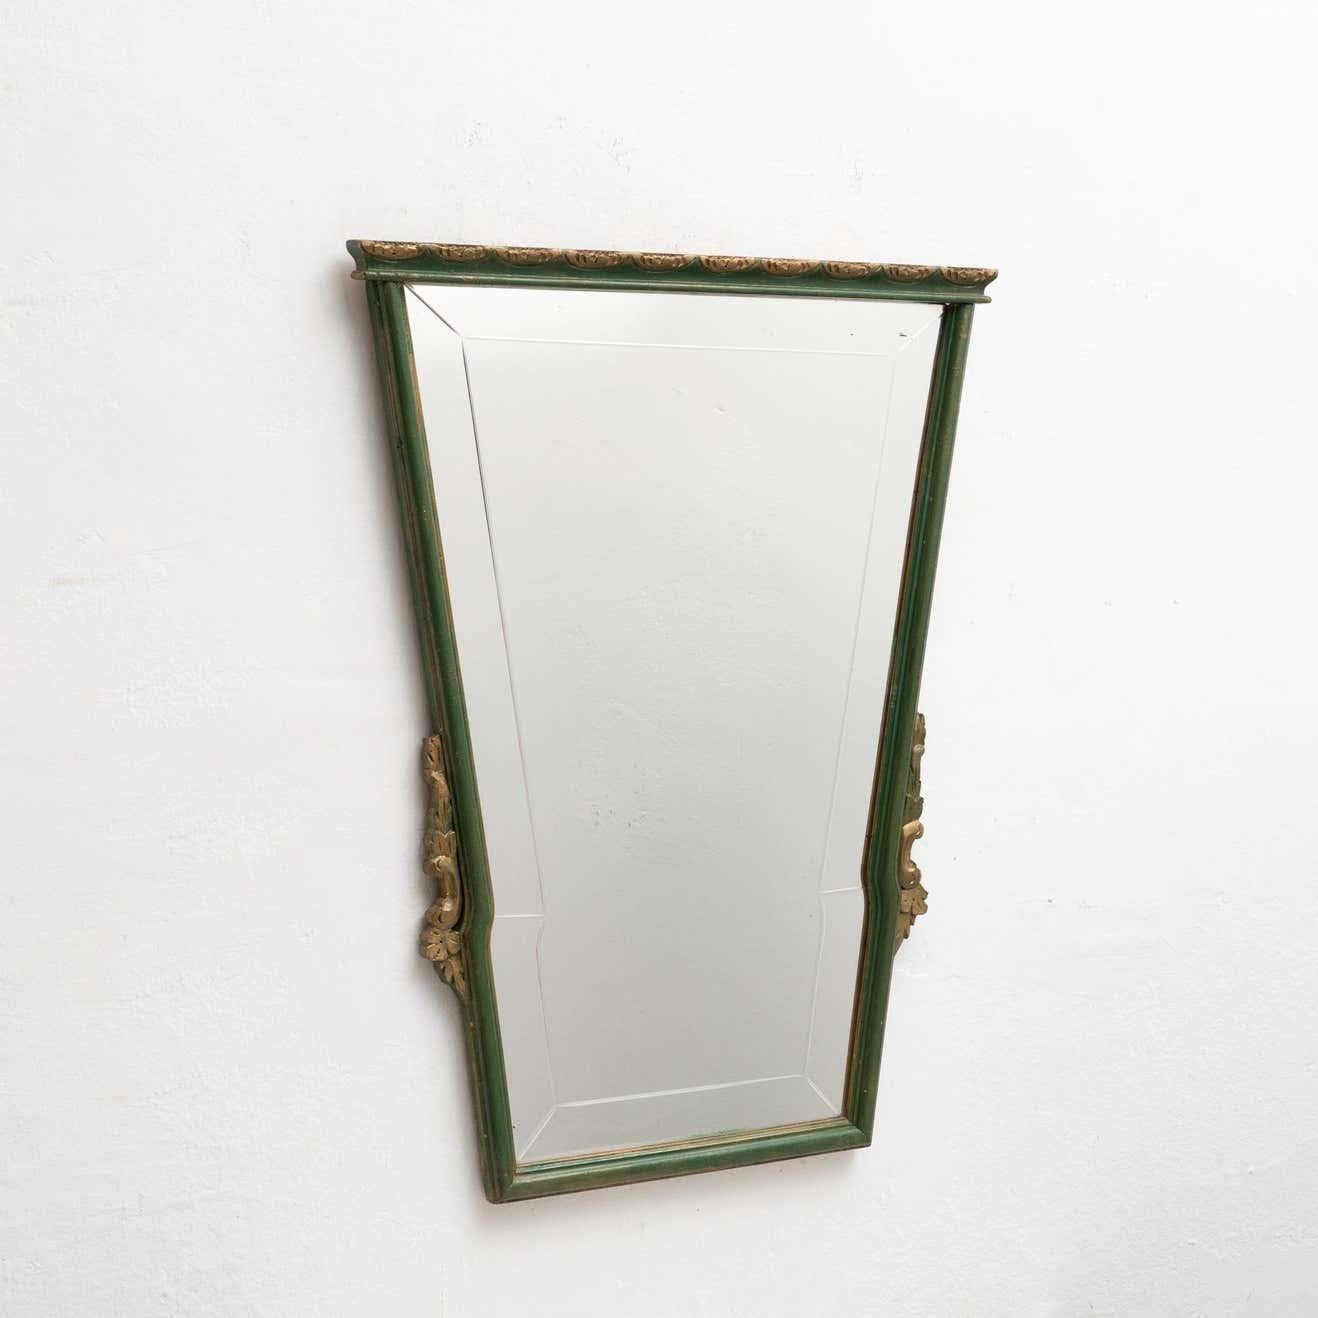 Antique Spanish handcrafted wooden mirror.

Manufactured by unknown designer in Spain, circa 1950

In original condition, with minor wear consistent of age and use, preserving a beautiful patina.

Materials:
Mirror.
Wood.